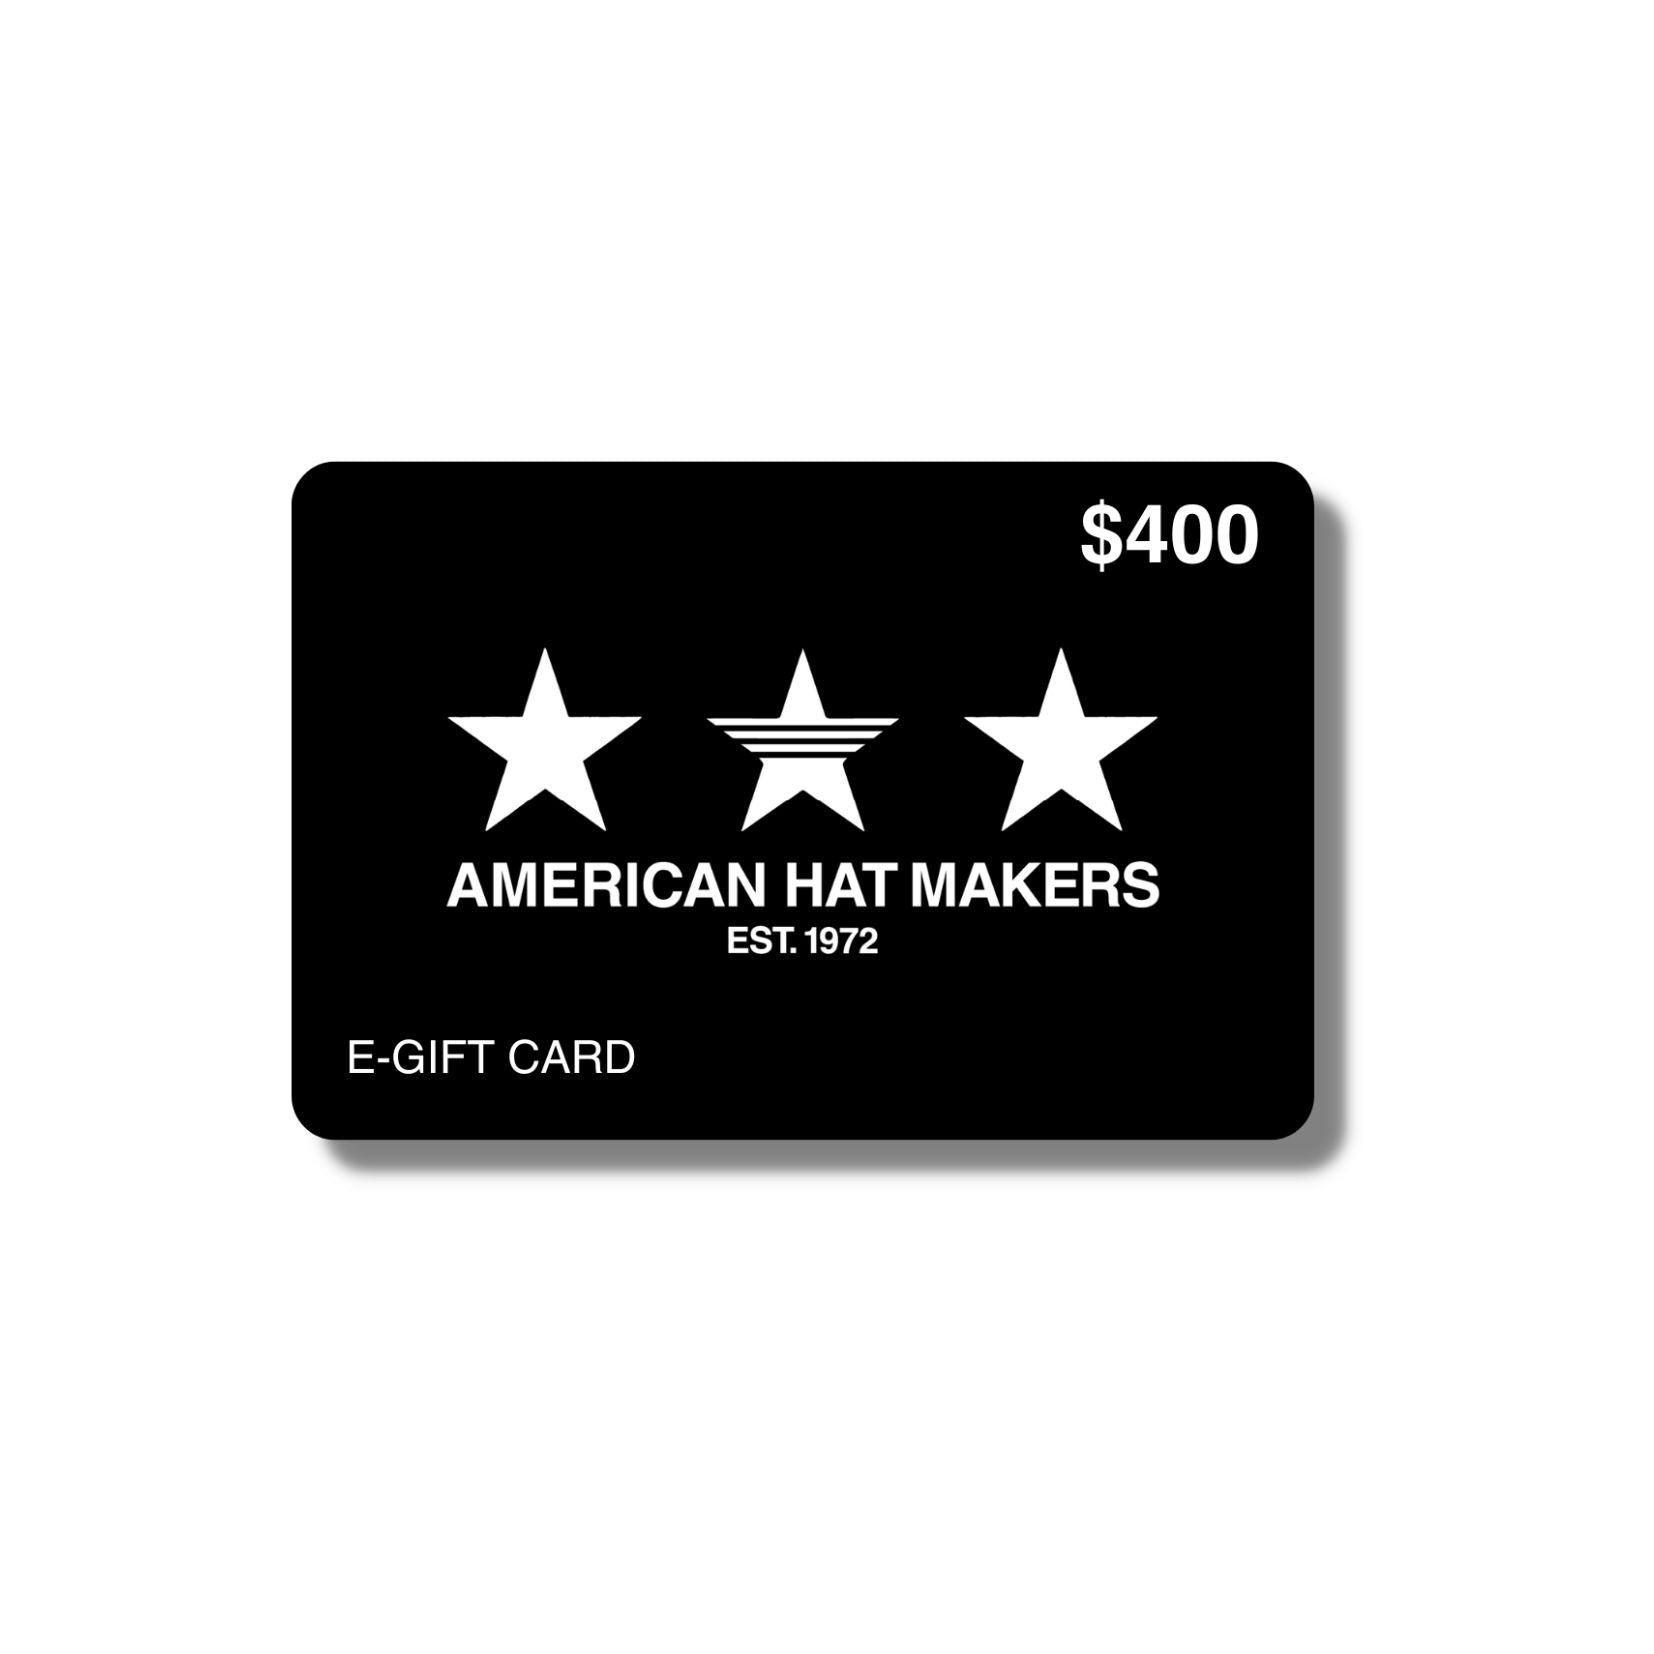 Electronic Gift Card amounting to $400 by American Hat Makers